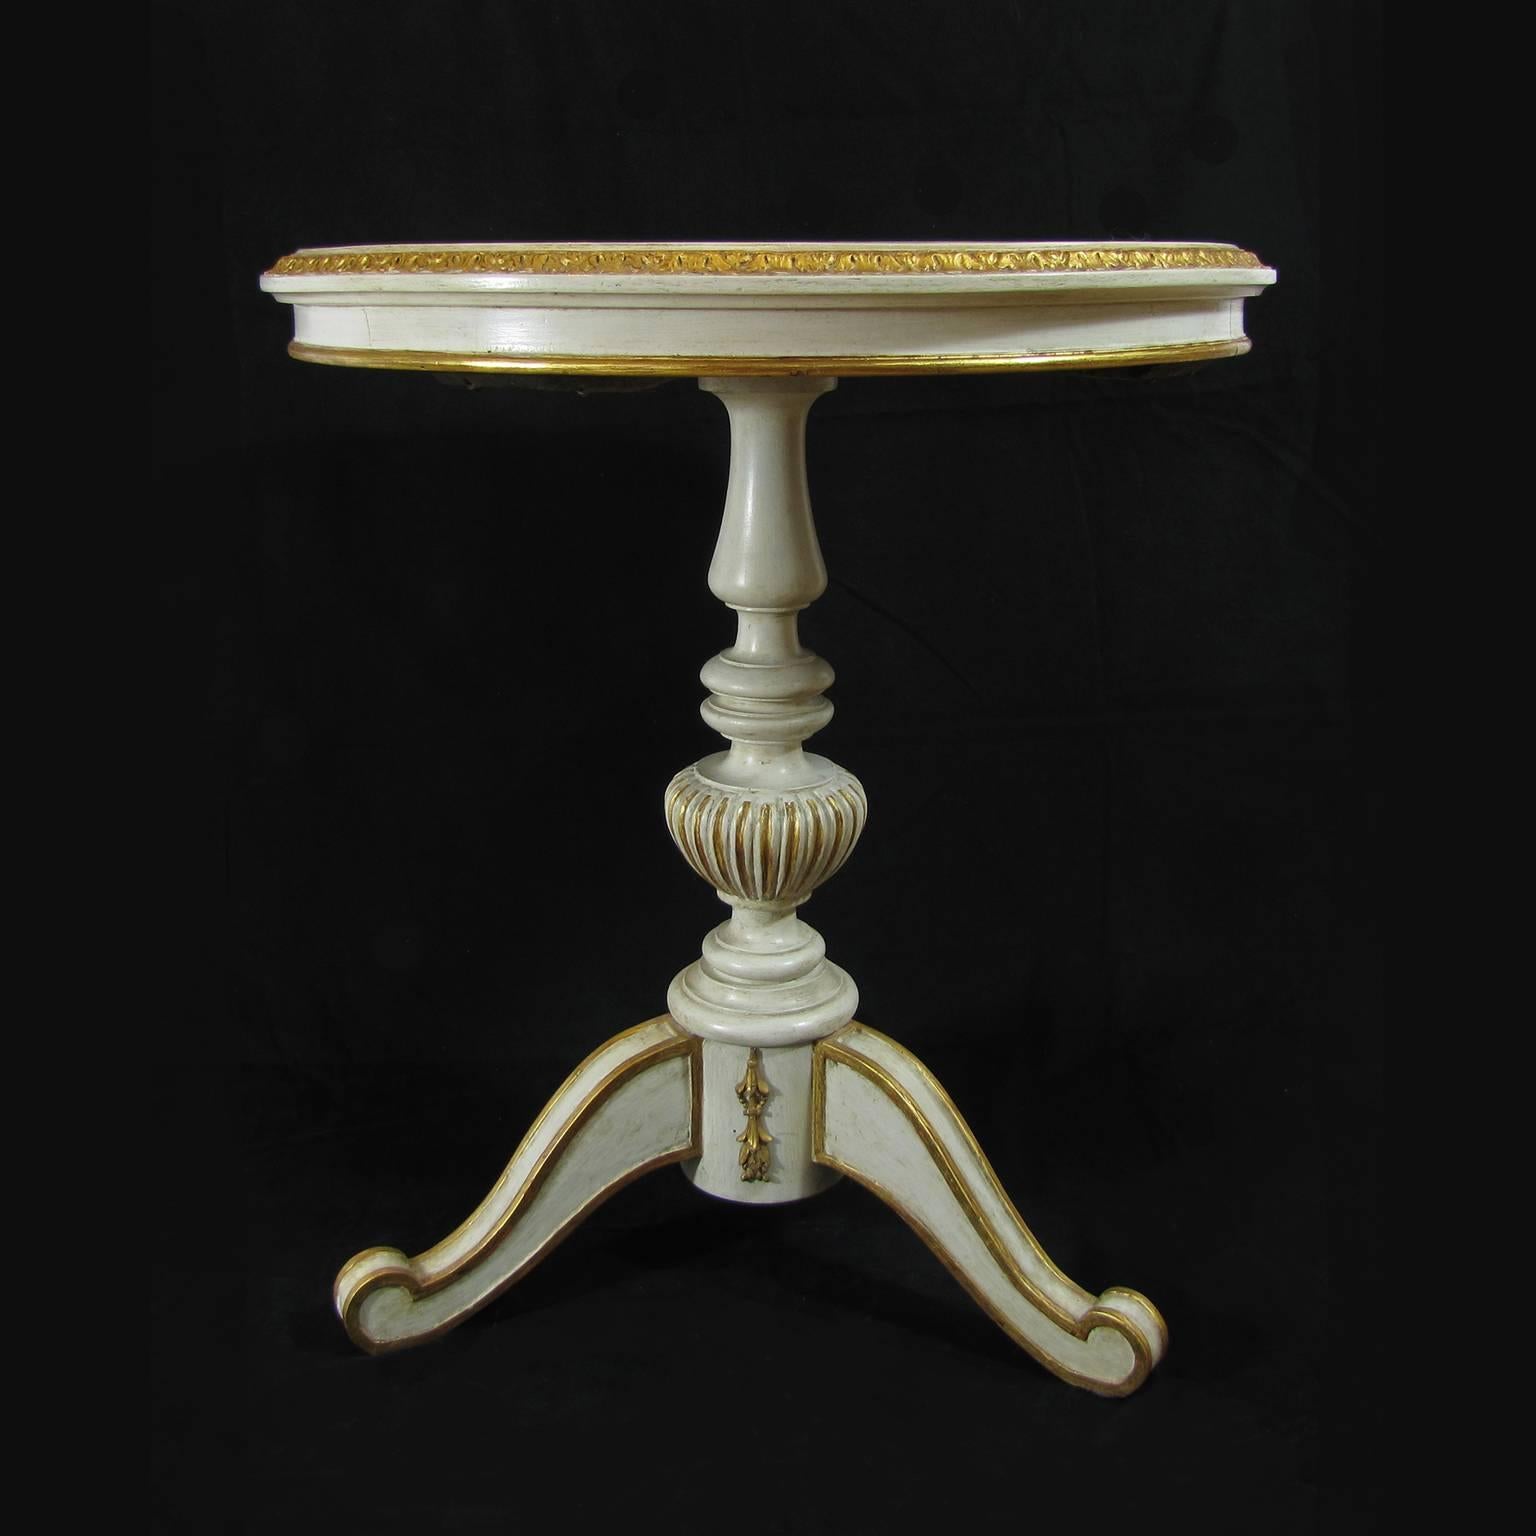 A centre table in carved wood, painted with white tempera magra, some golden painted details and a Pietra Dura tabletop.
One vertical vase-shaped leg with tripartite base is surmounted by a built-in marble tabletop in Belgian black marble and an